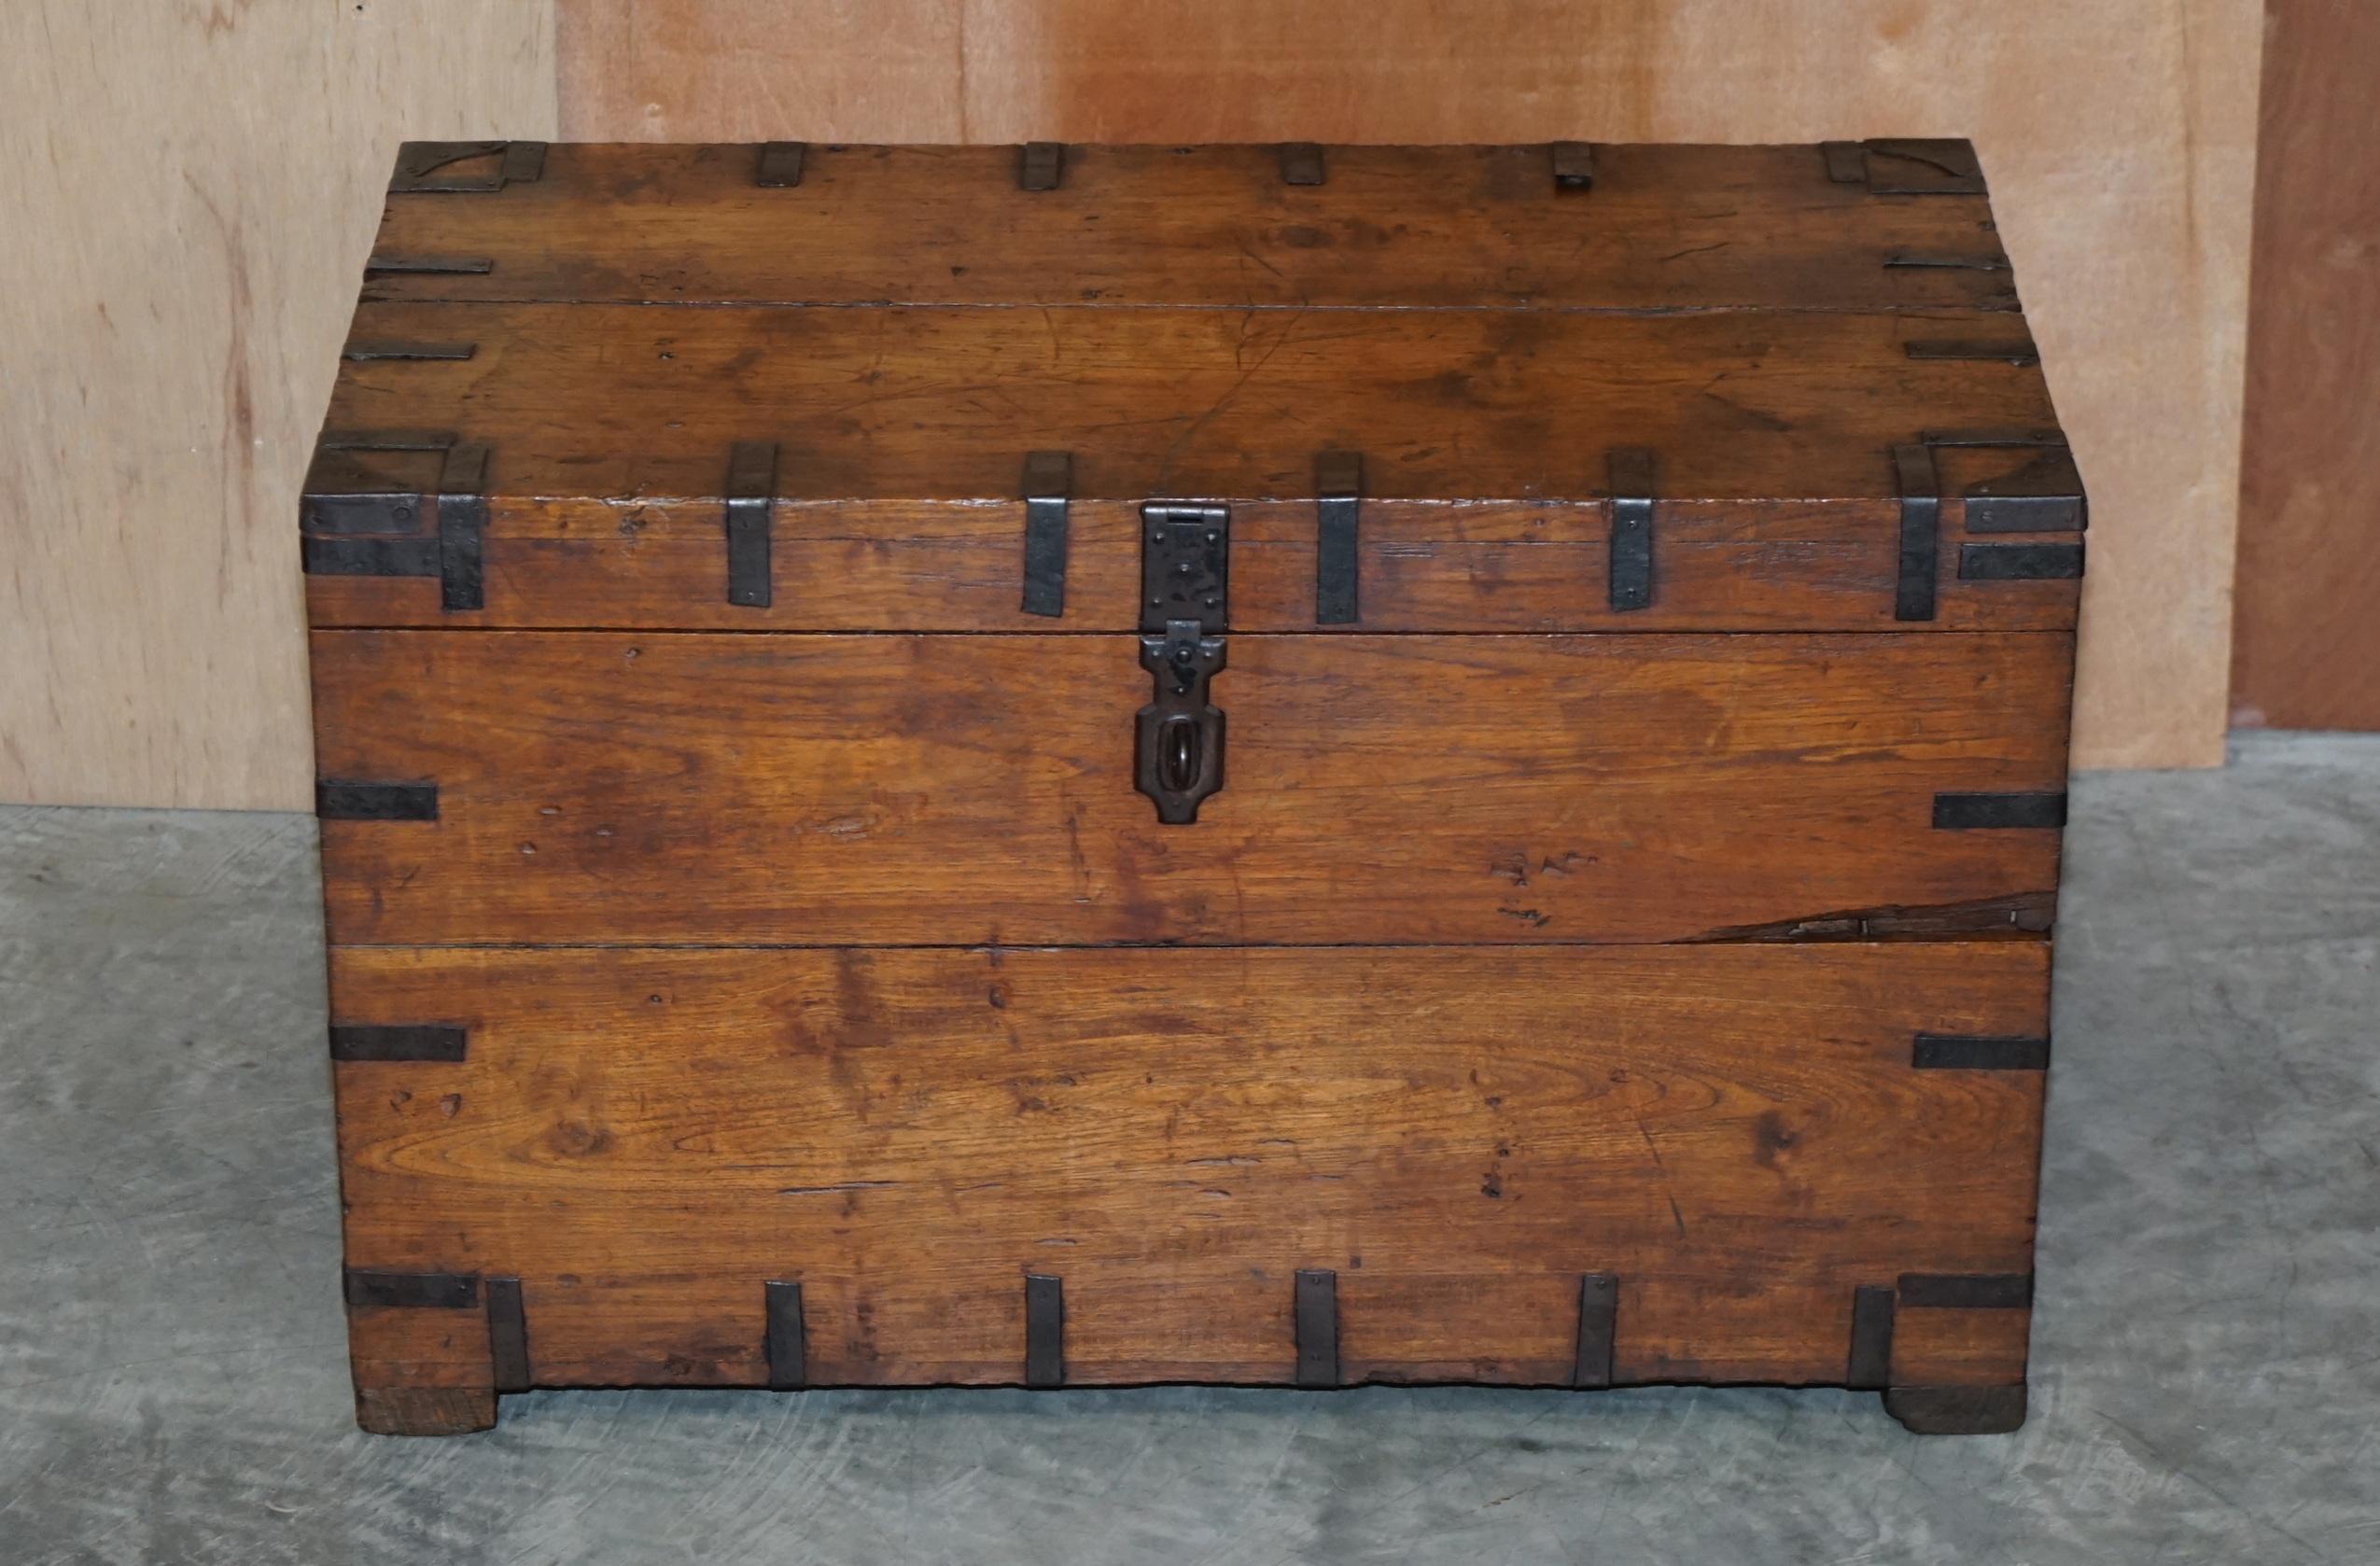 We are delighted to offer for sale this lovely hand made in England circa 1900 oak & wrought iron bounded steamer travel trunk with zinc lining 

A very decorative and versatile trunk, ideally suited as a coffee table but can of course be used for